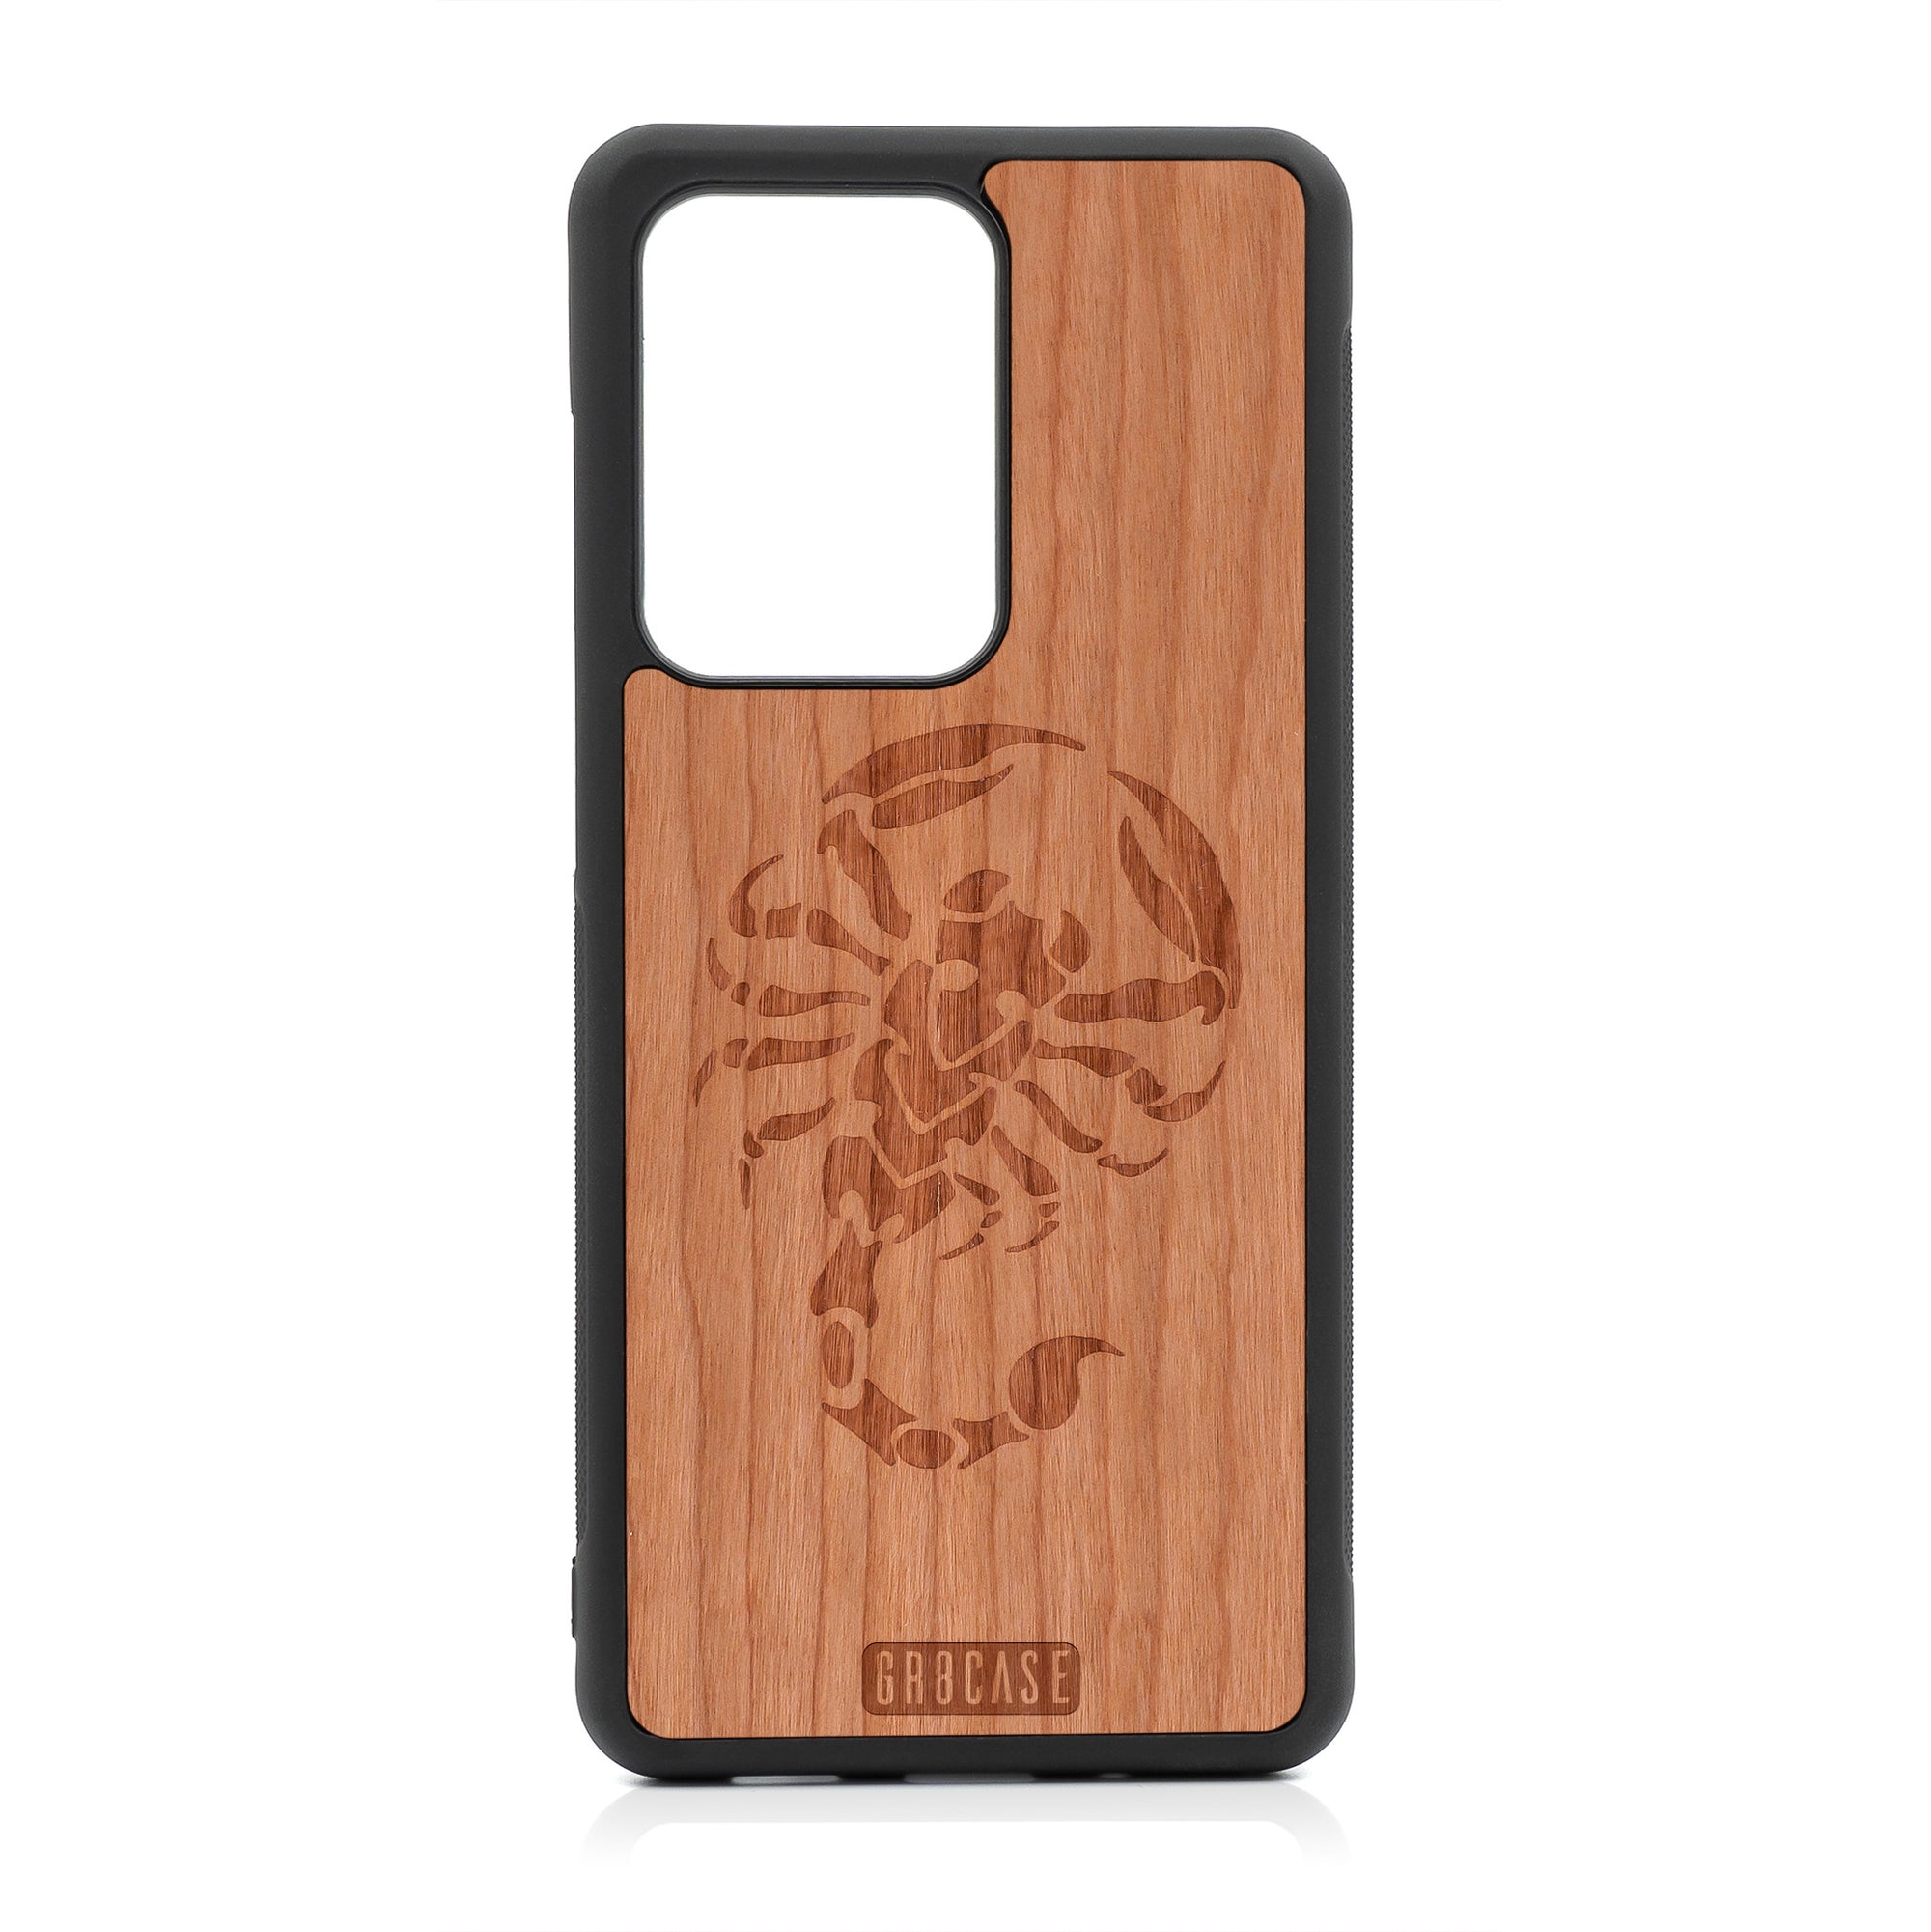 Scorpion Design Wood Case For Samsung Galaxy S20 Ultra by GR8CASE